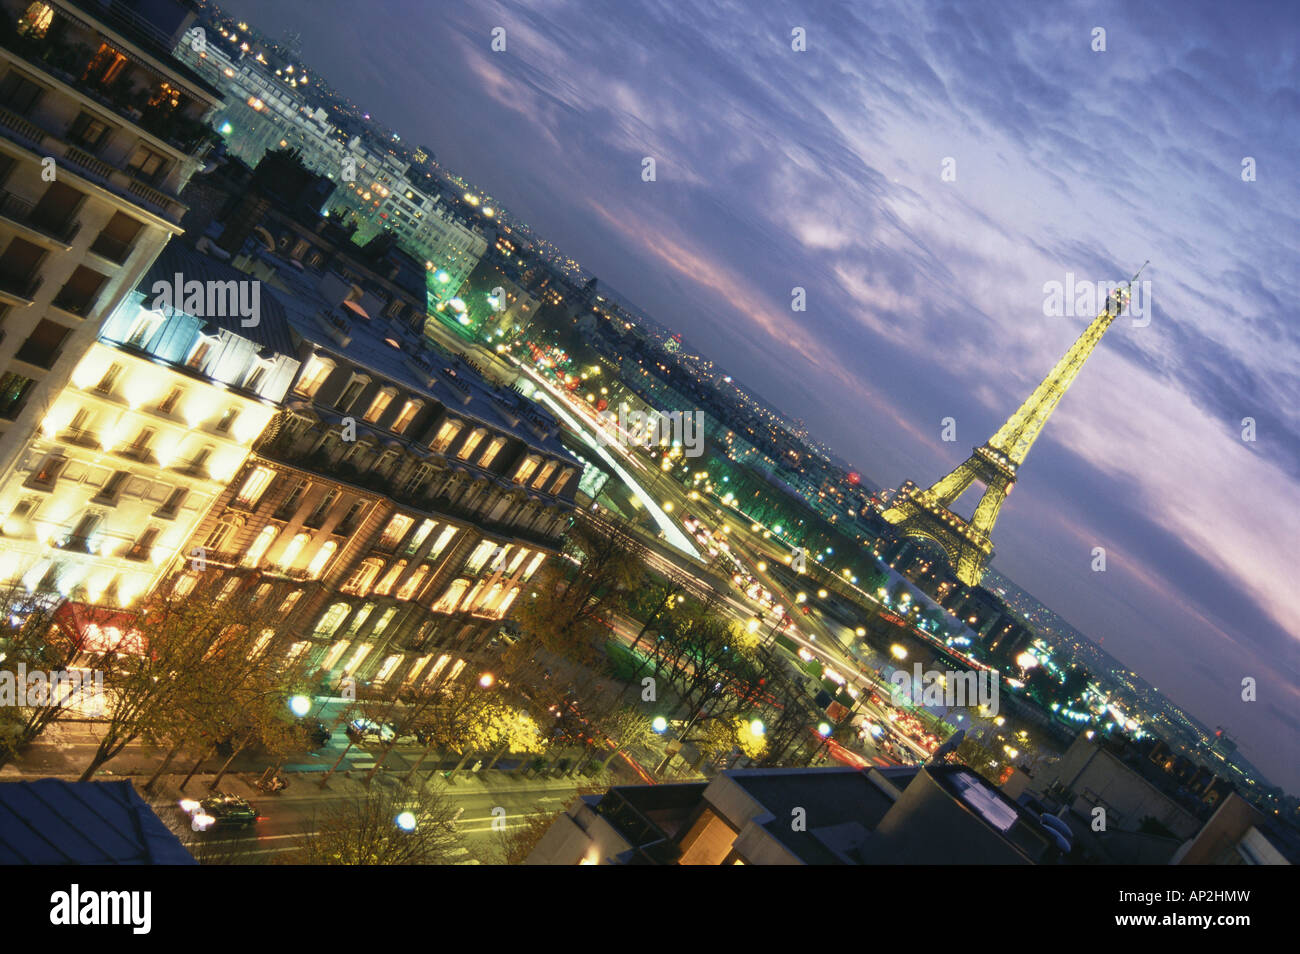 Panorama, Cityscape of Paris at night, with Eifel tower in the background, illuminated, Capitel, Paris, France Stock Photo